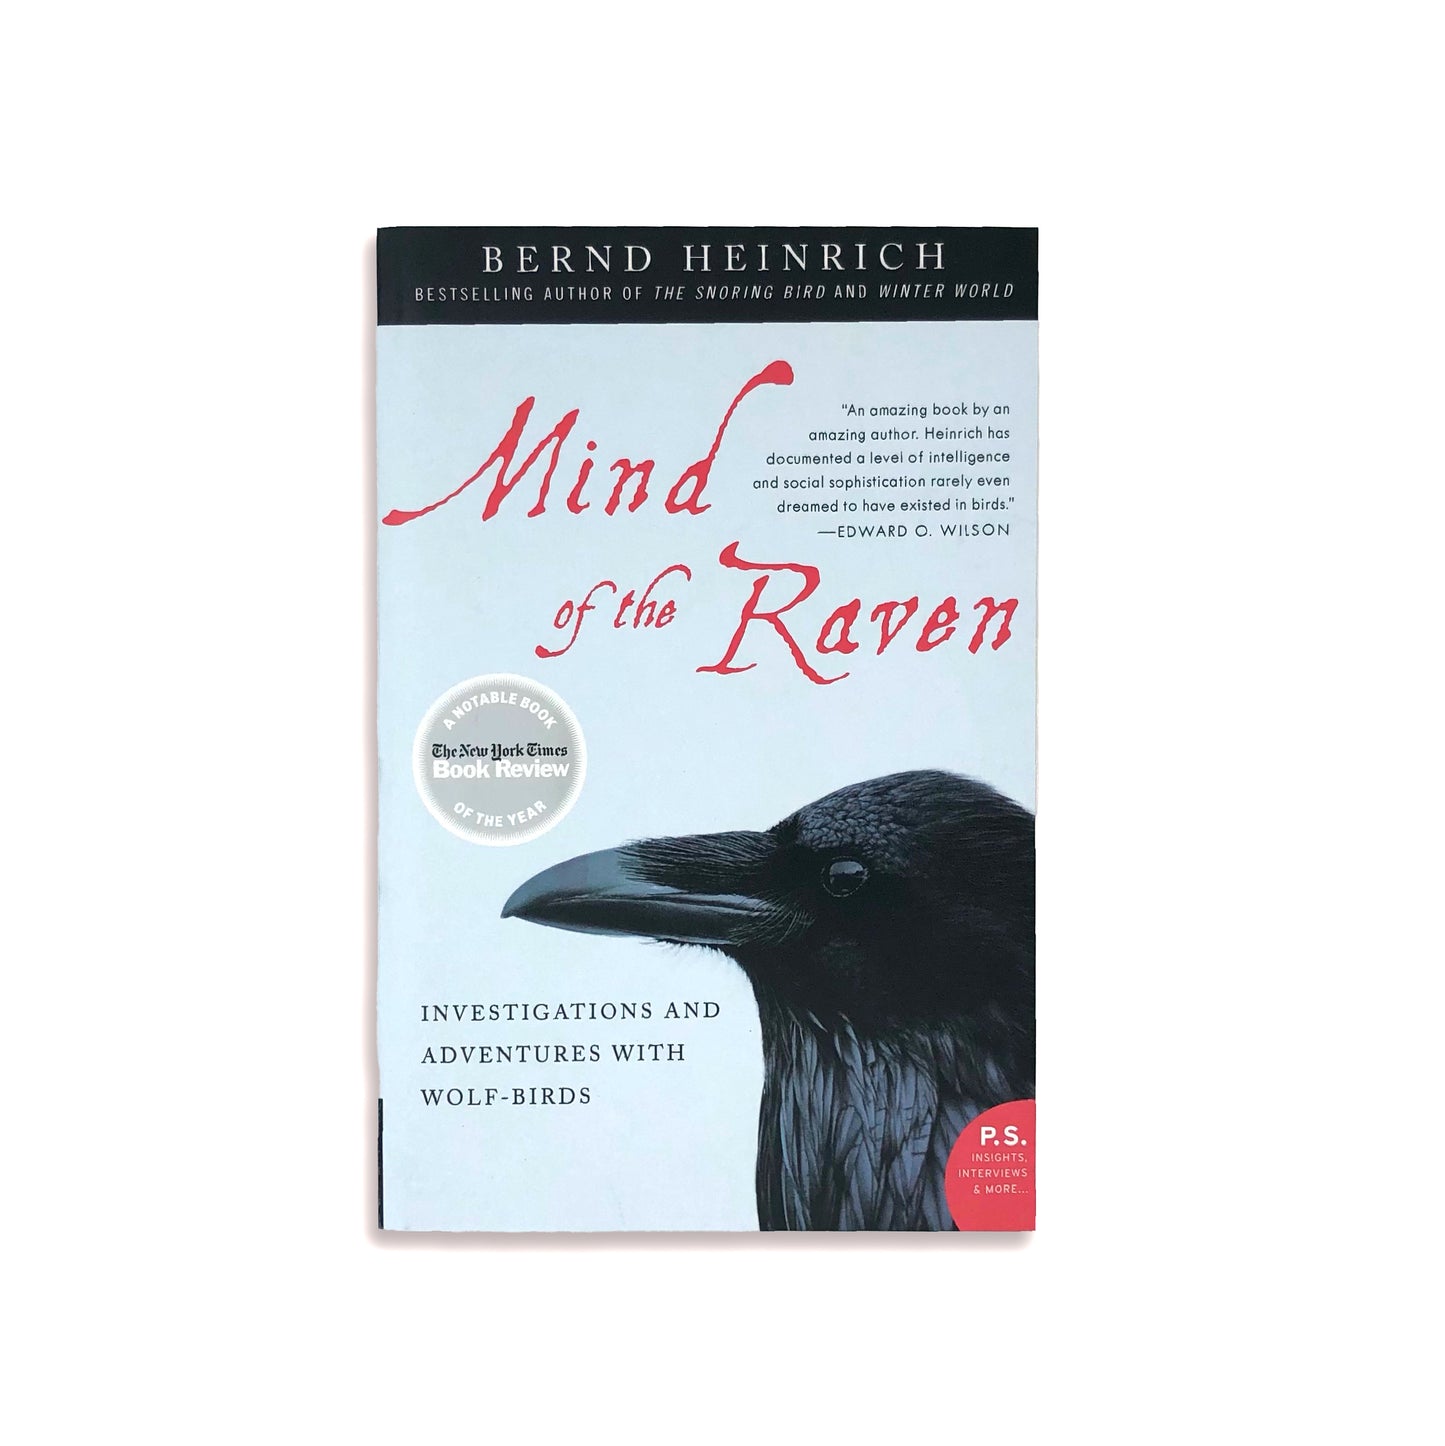 Mind of the Raven: Investigations and Adventures with Wolf-Birds - Bernd Heinrich